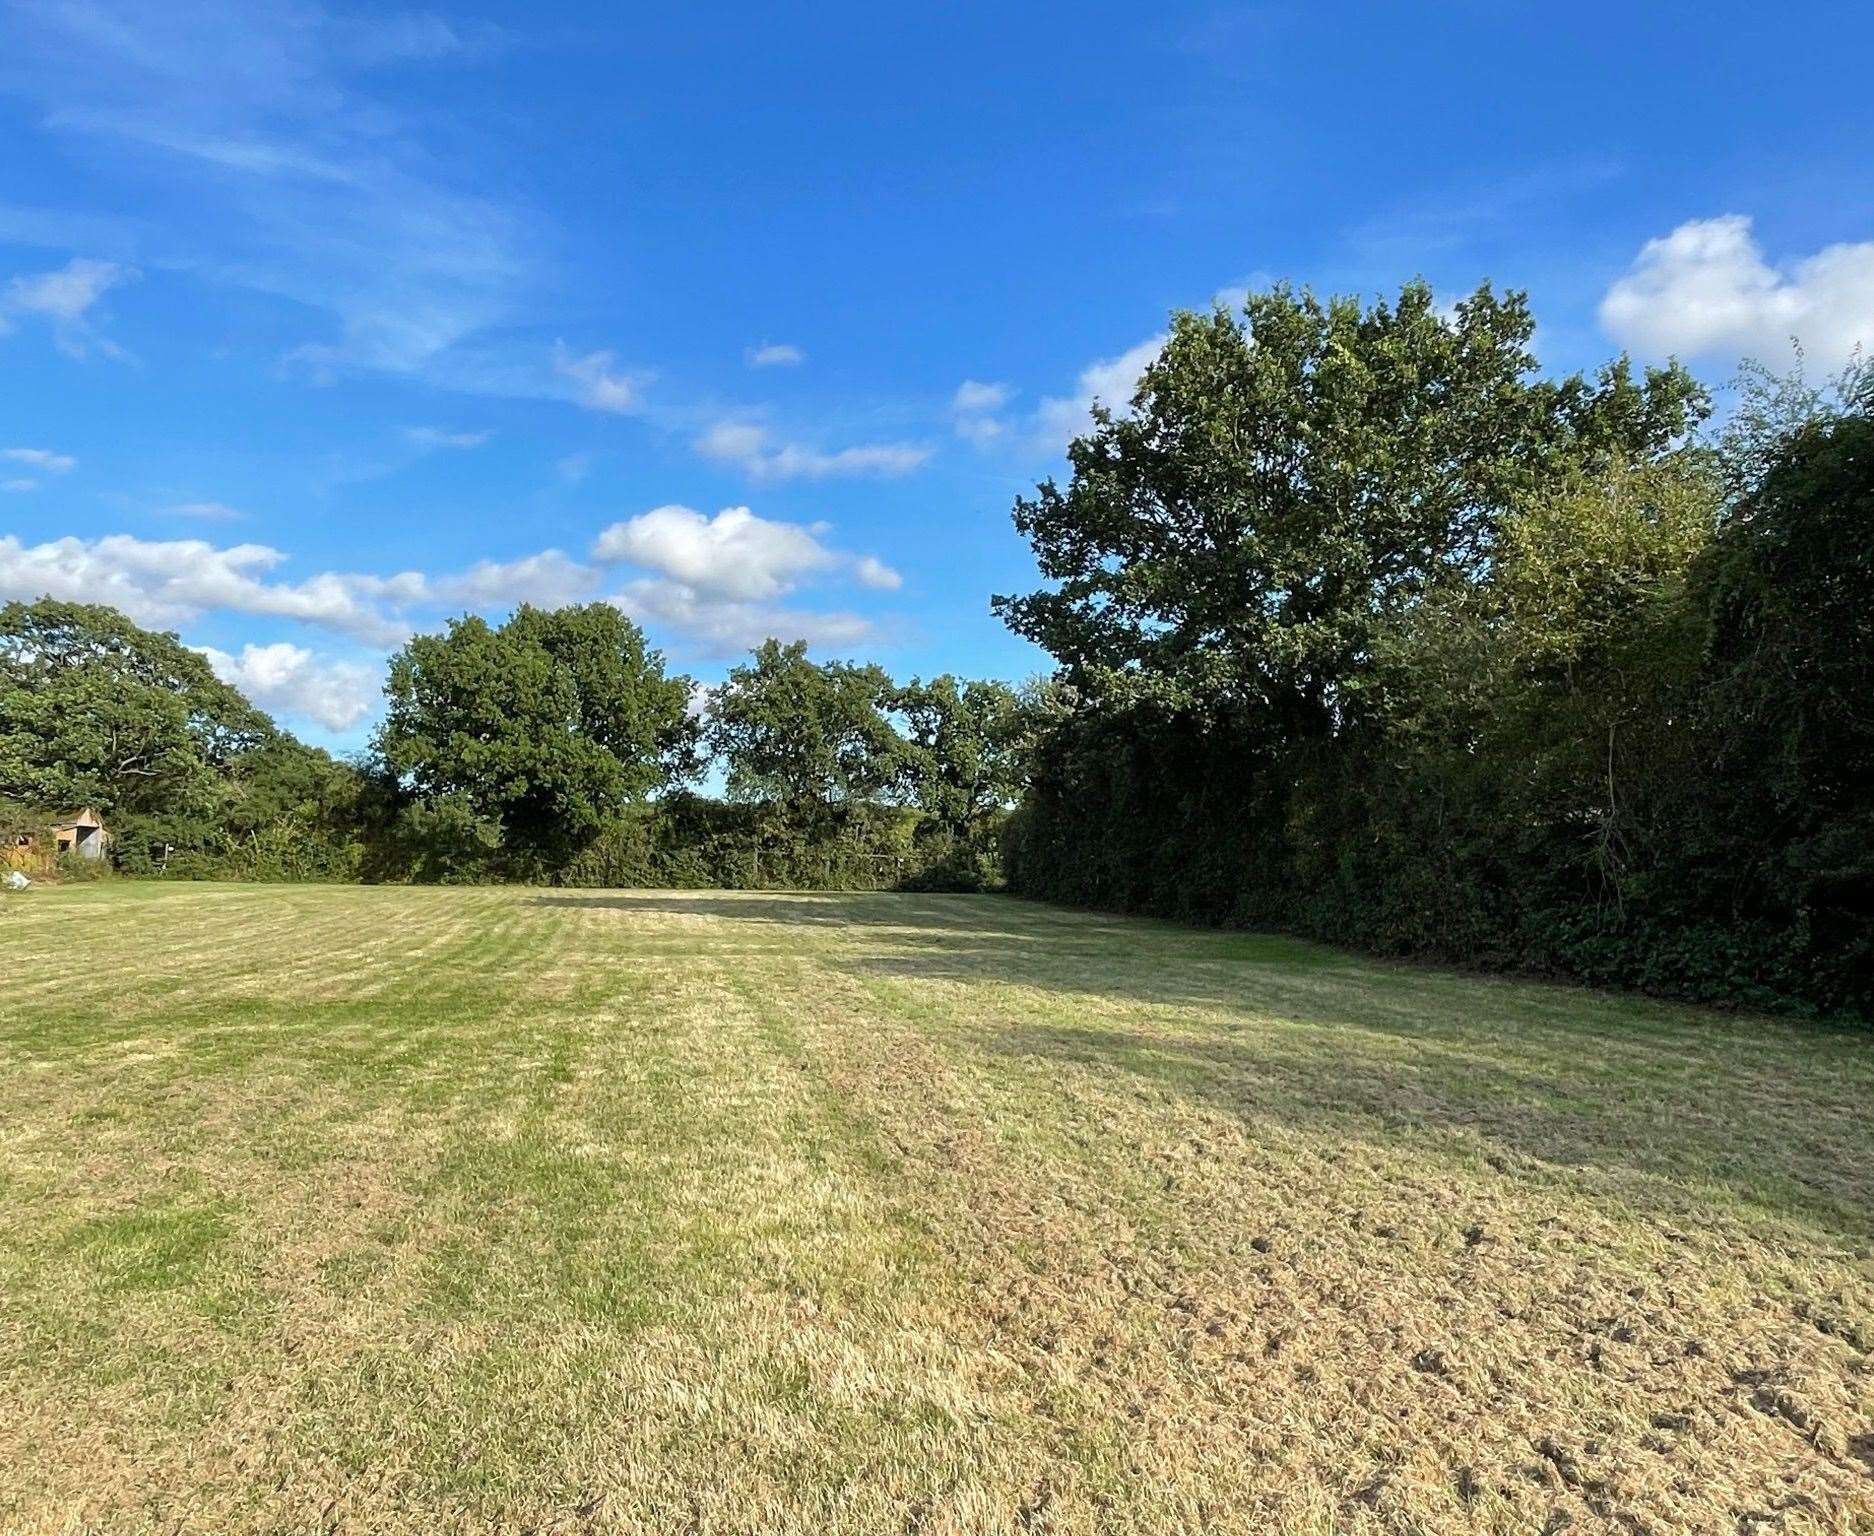 The field at the back of the couple’s property in Tally Ho Road, Shadoxhurst, is currently unused